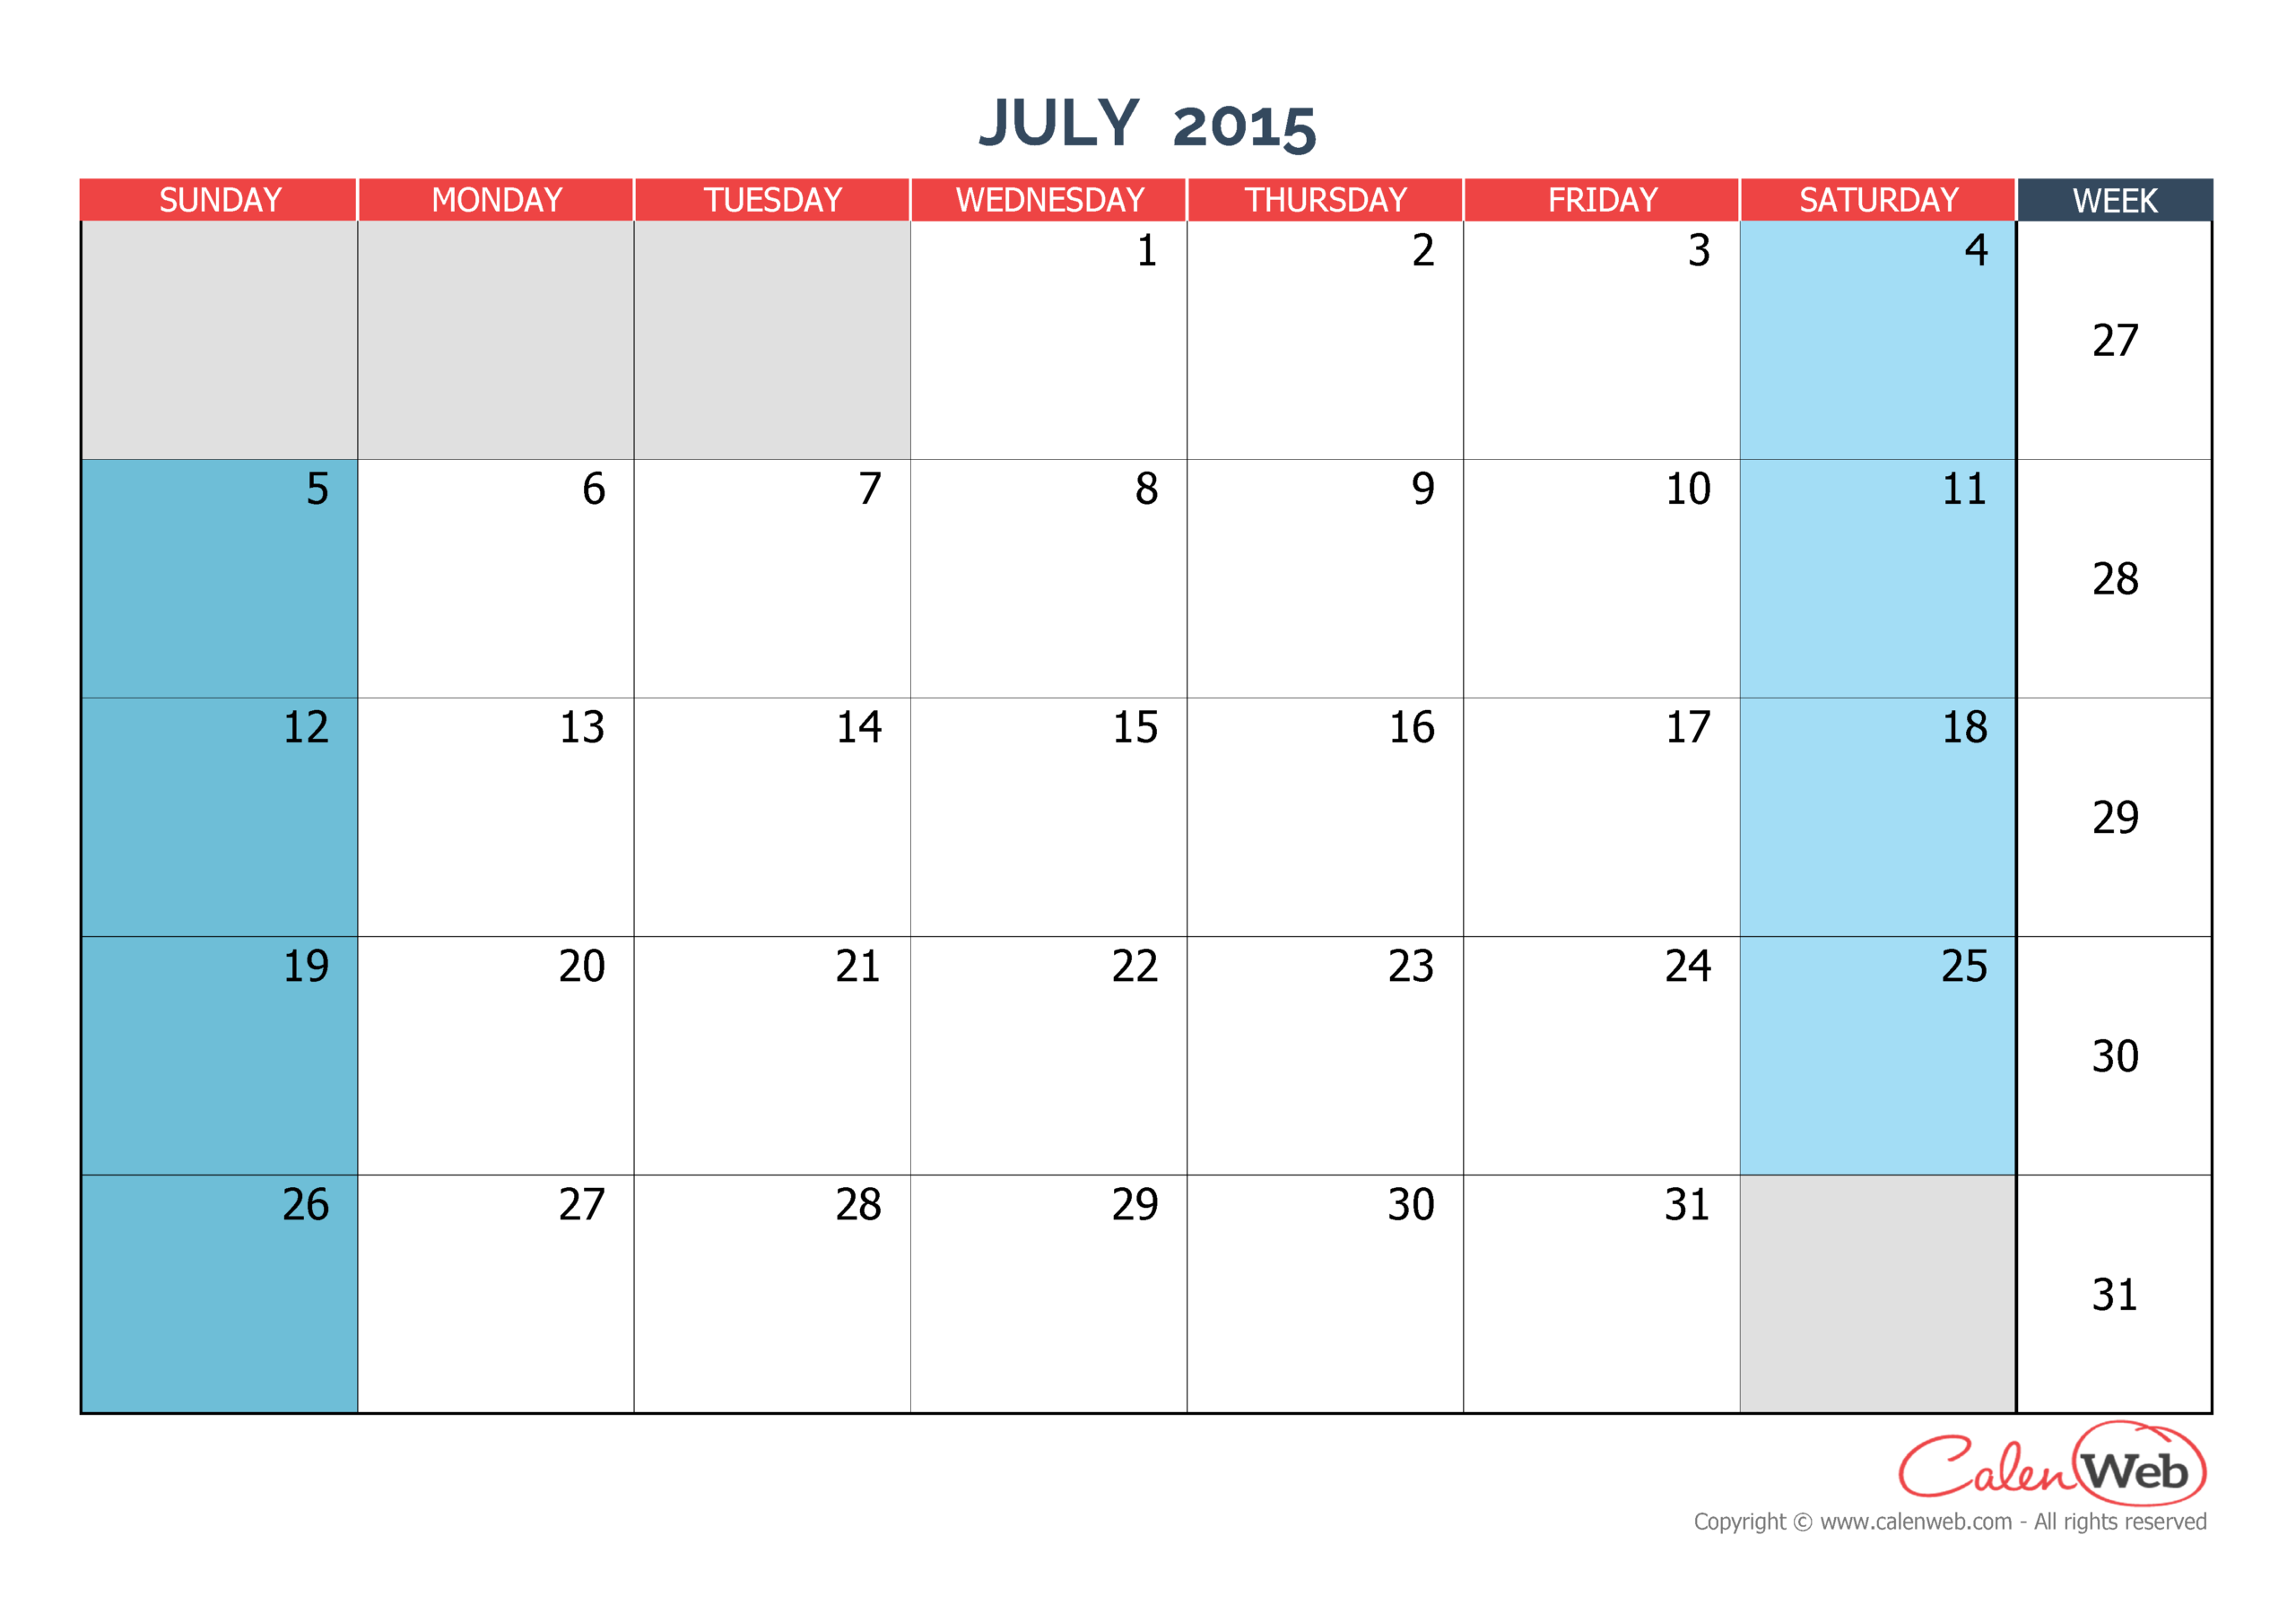 Monthly Calendar - Month Of July 2015 The Week Starts On